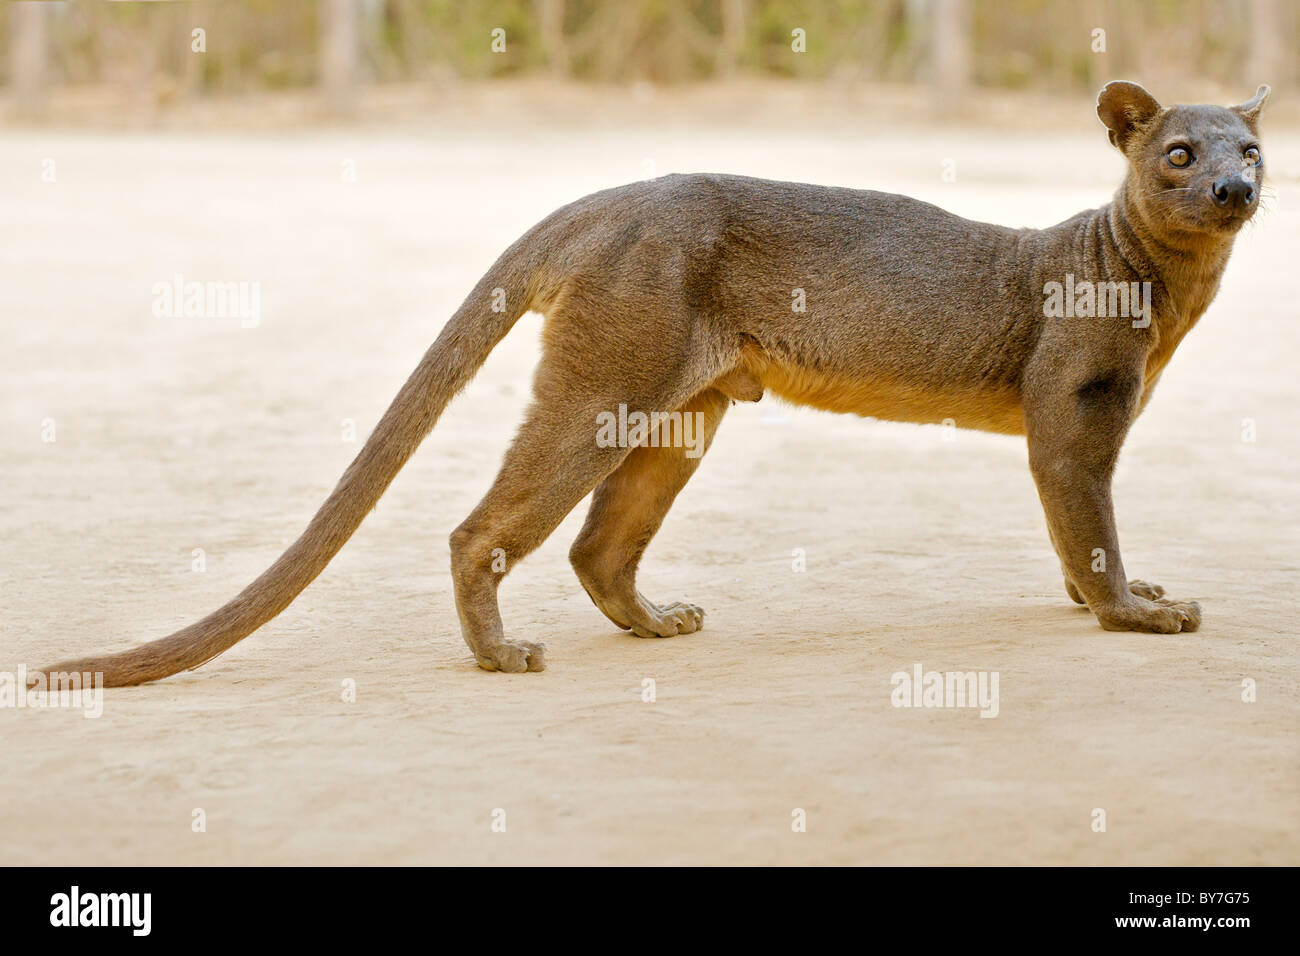 An endangered fossa (Cryptoprocta ferox), one of the few Madagascan carnivores, in Kirindy Forest Reserve, southwest Madagascar. Stock Photo